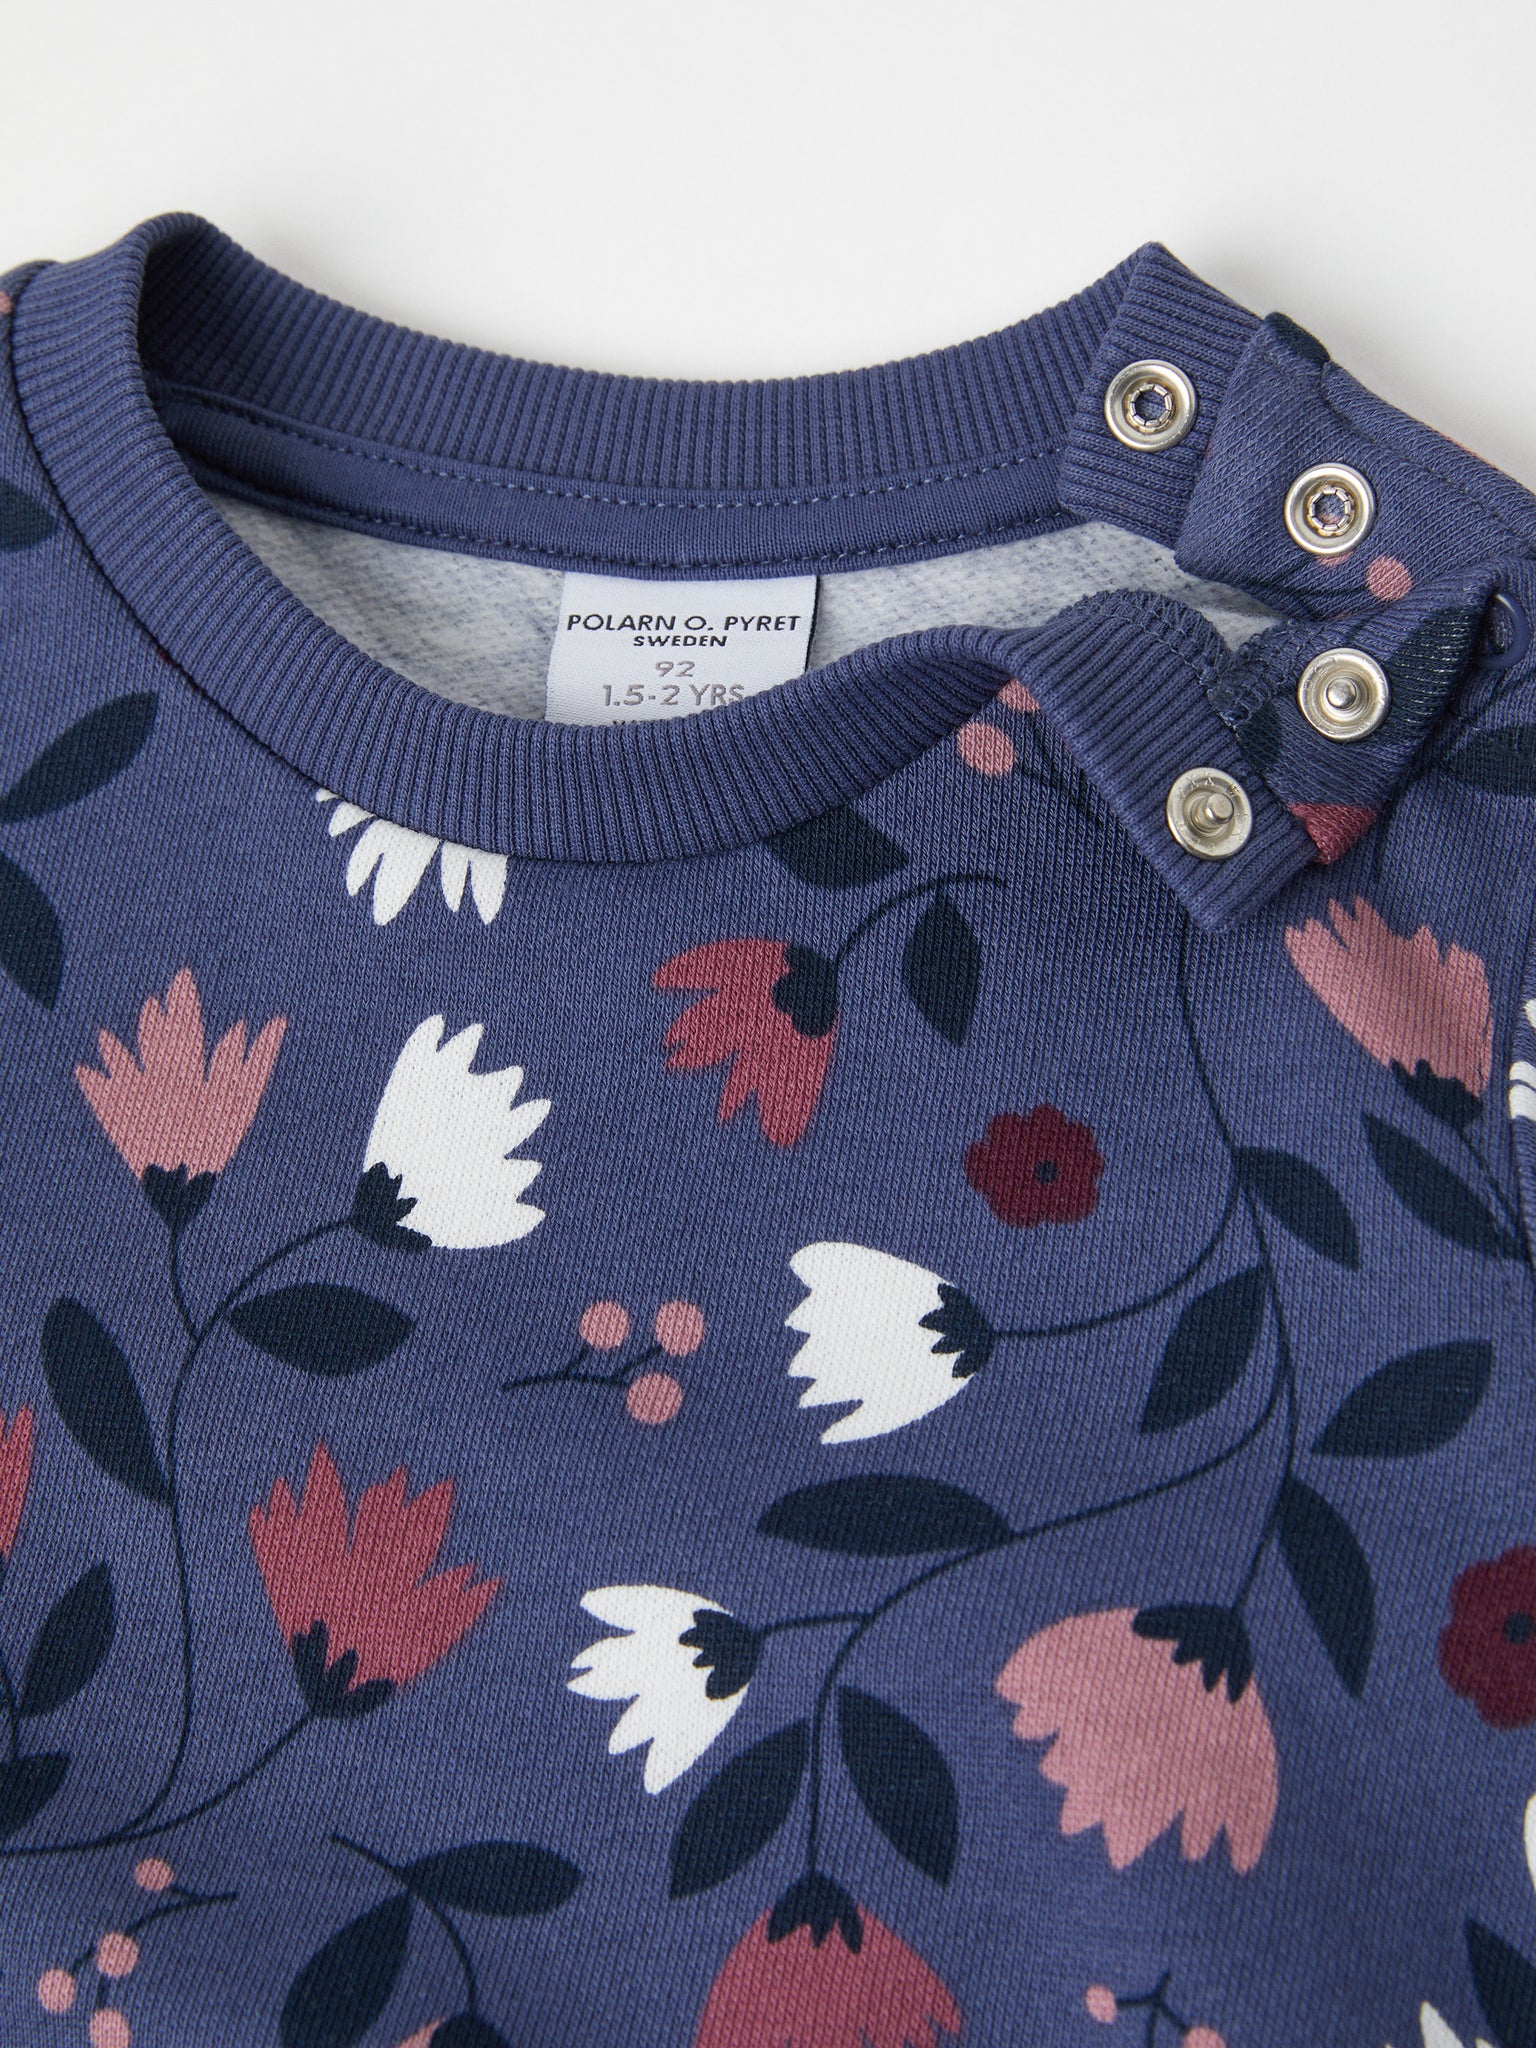 Organic Cotton Floral Kids Sweatshirt from the Polarn O. Pyret kidswear collection. The best ethical kids clothes